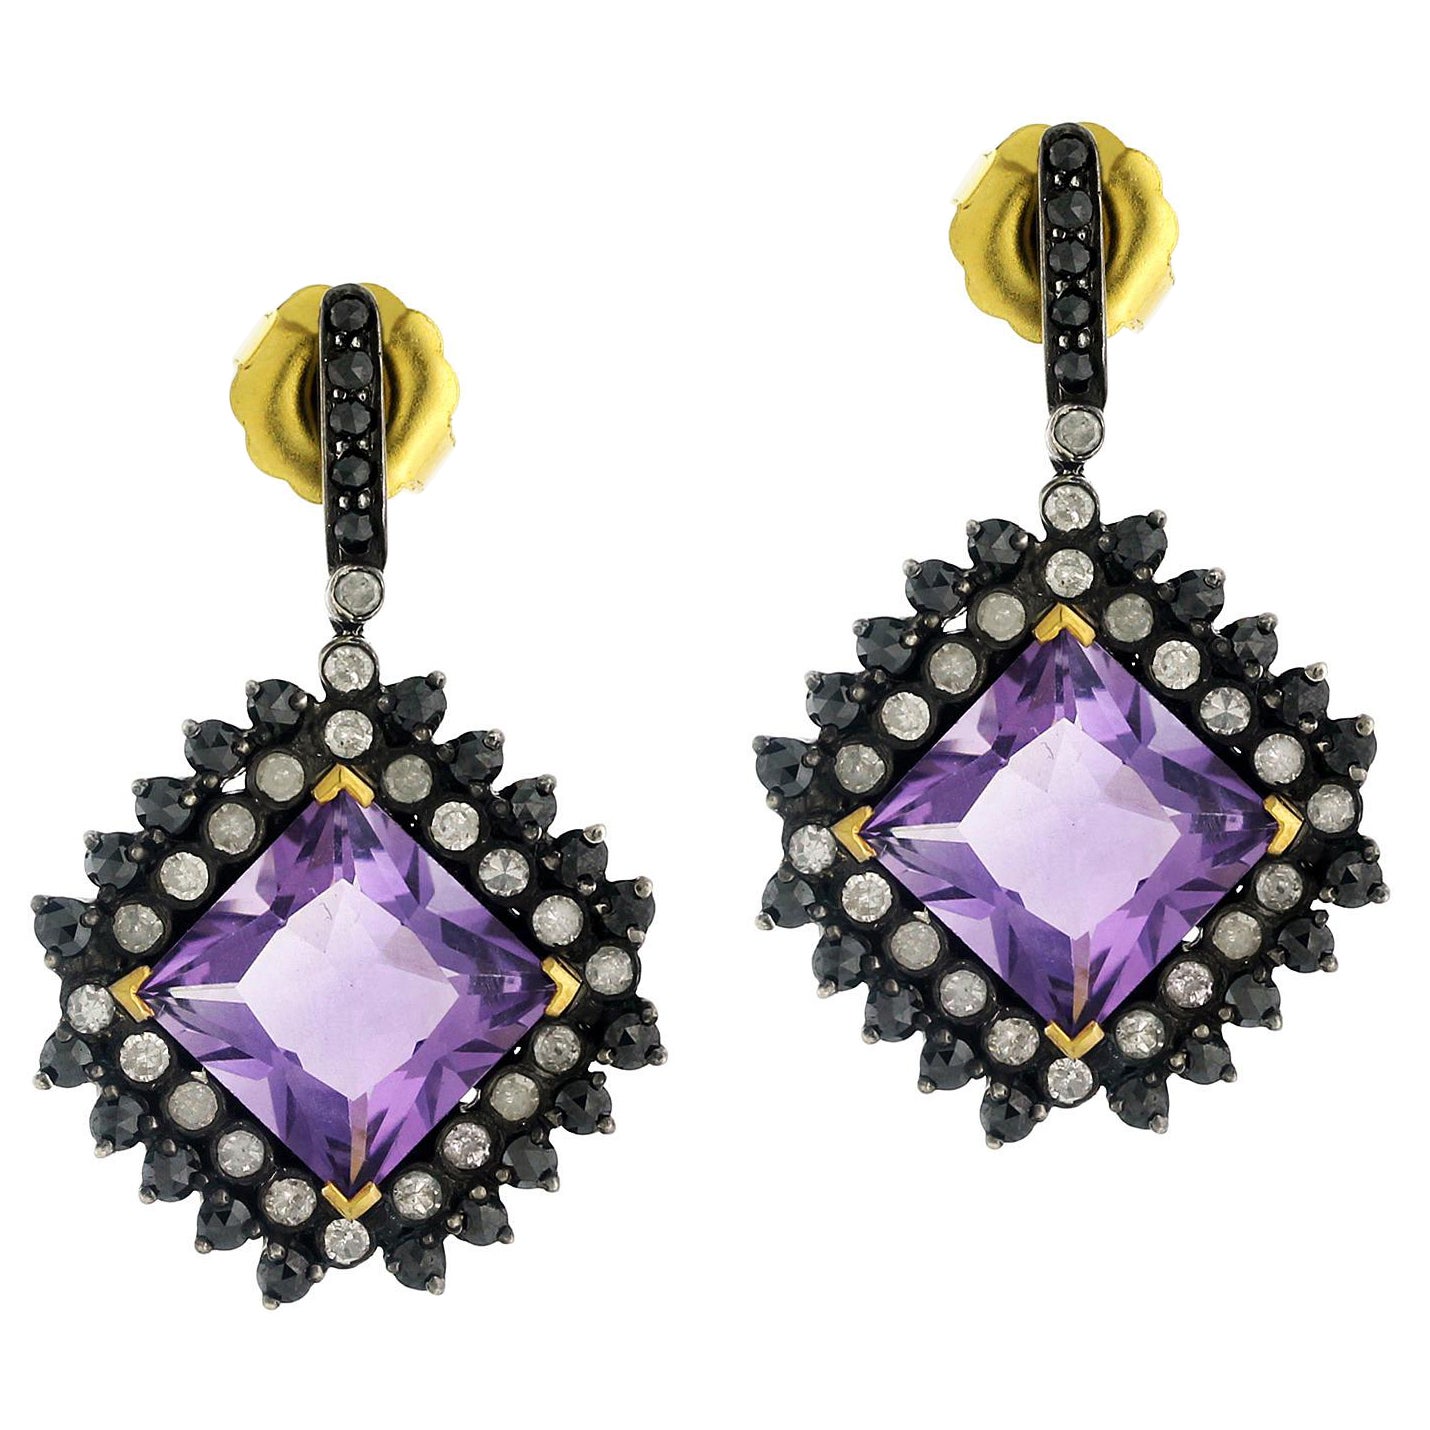 15.25cts Amethyst Drop Earring with Black and White Diamond in Silver and Gold For Sale